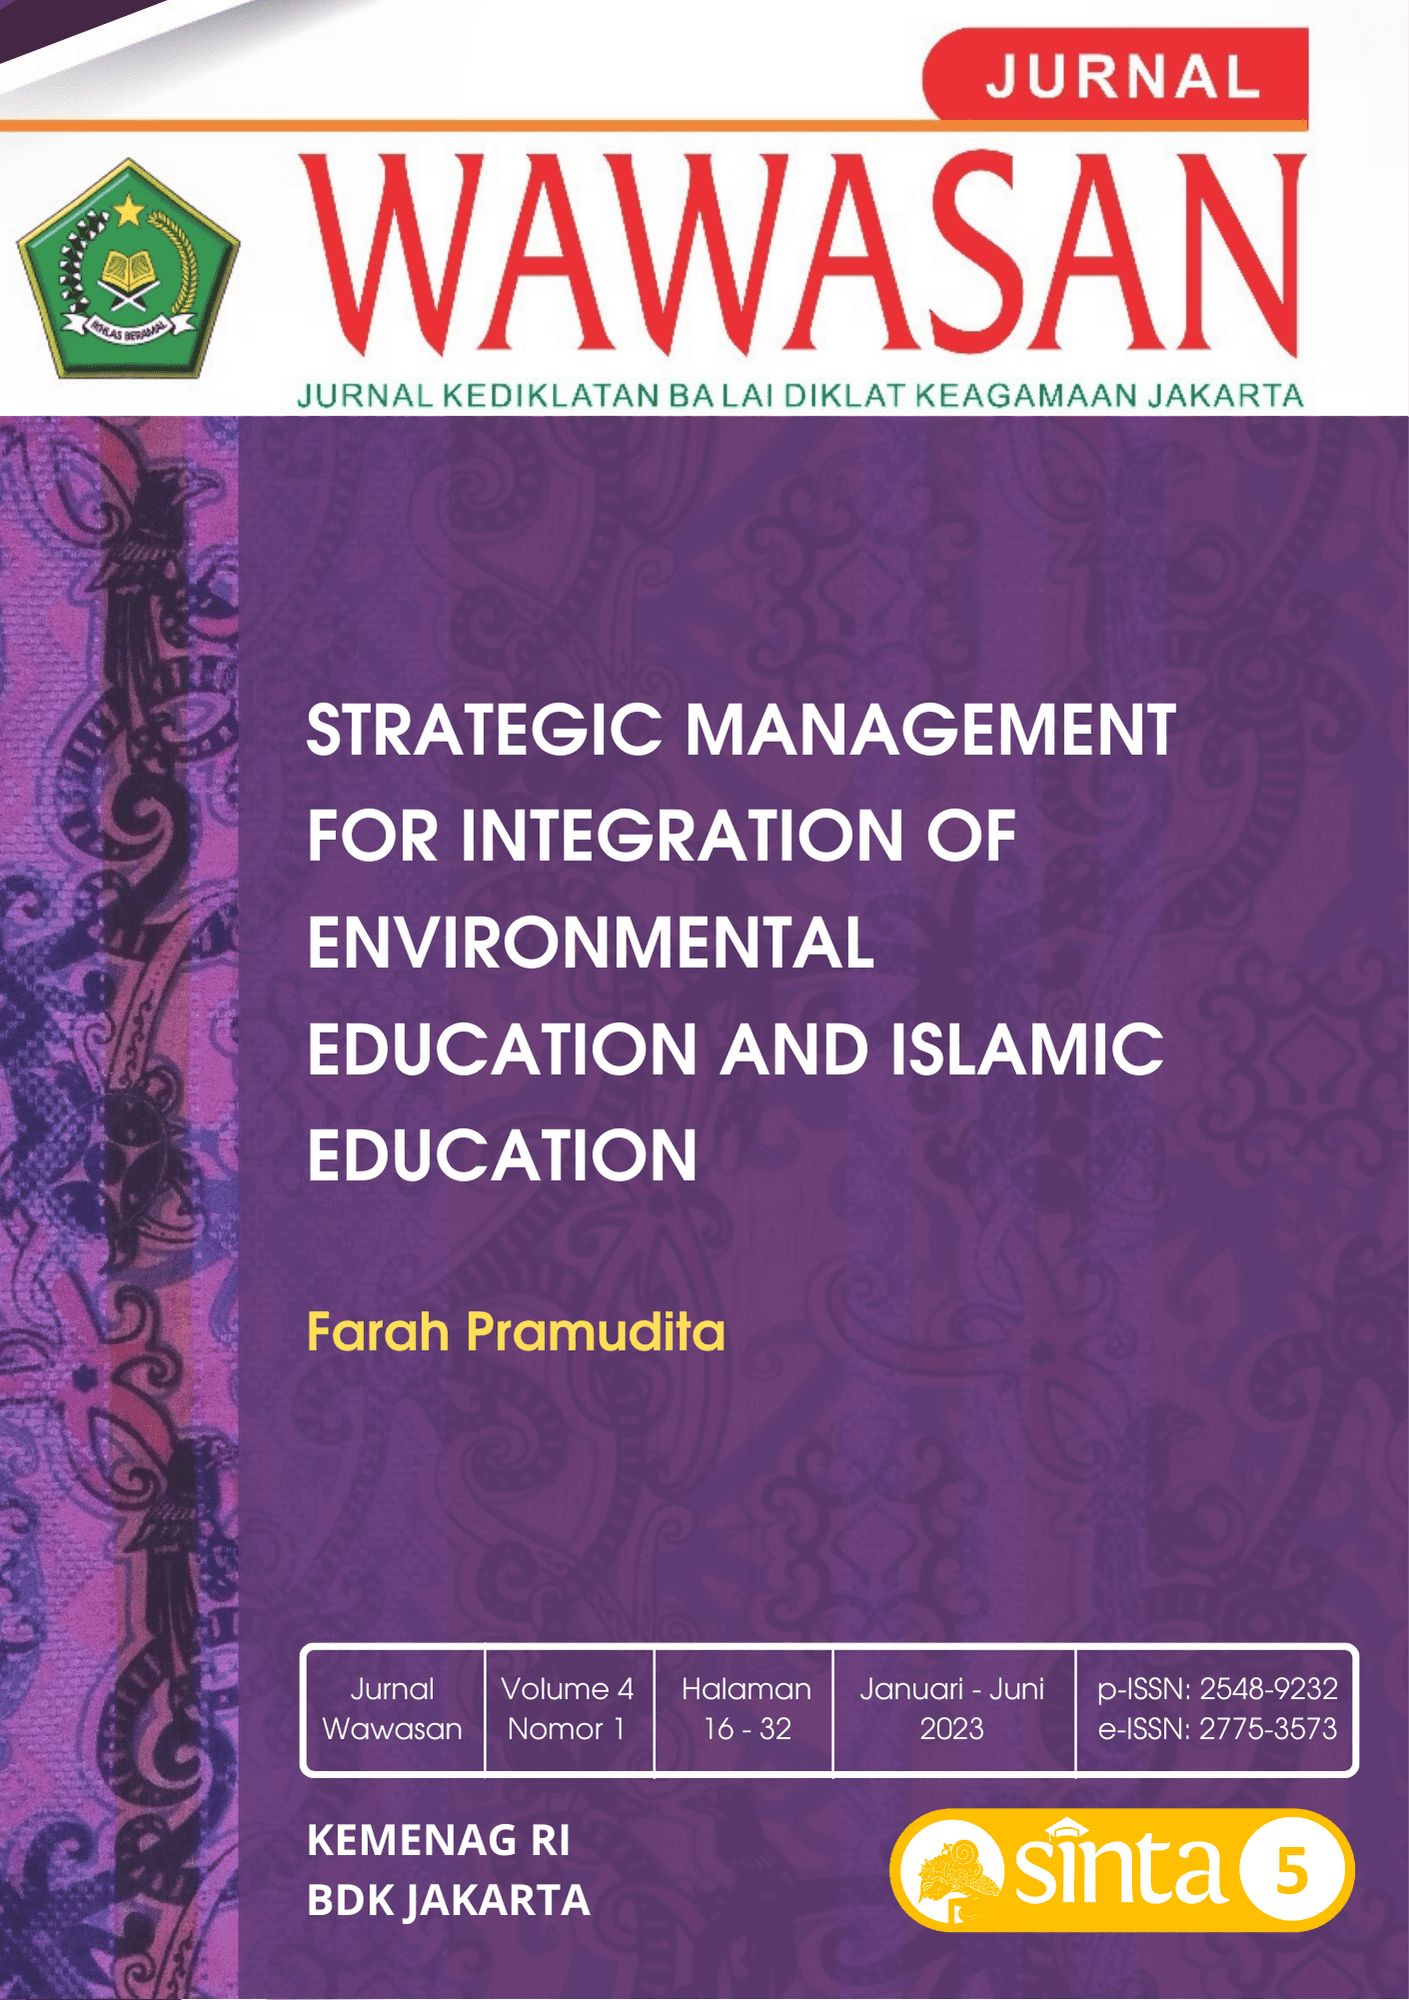 STRATEGIC MANAGEMENT FOR INTEGRATION OF ENVIRONMENTAL EDUCATION AND ISLAMIC EDUCATION